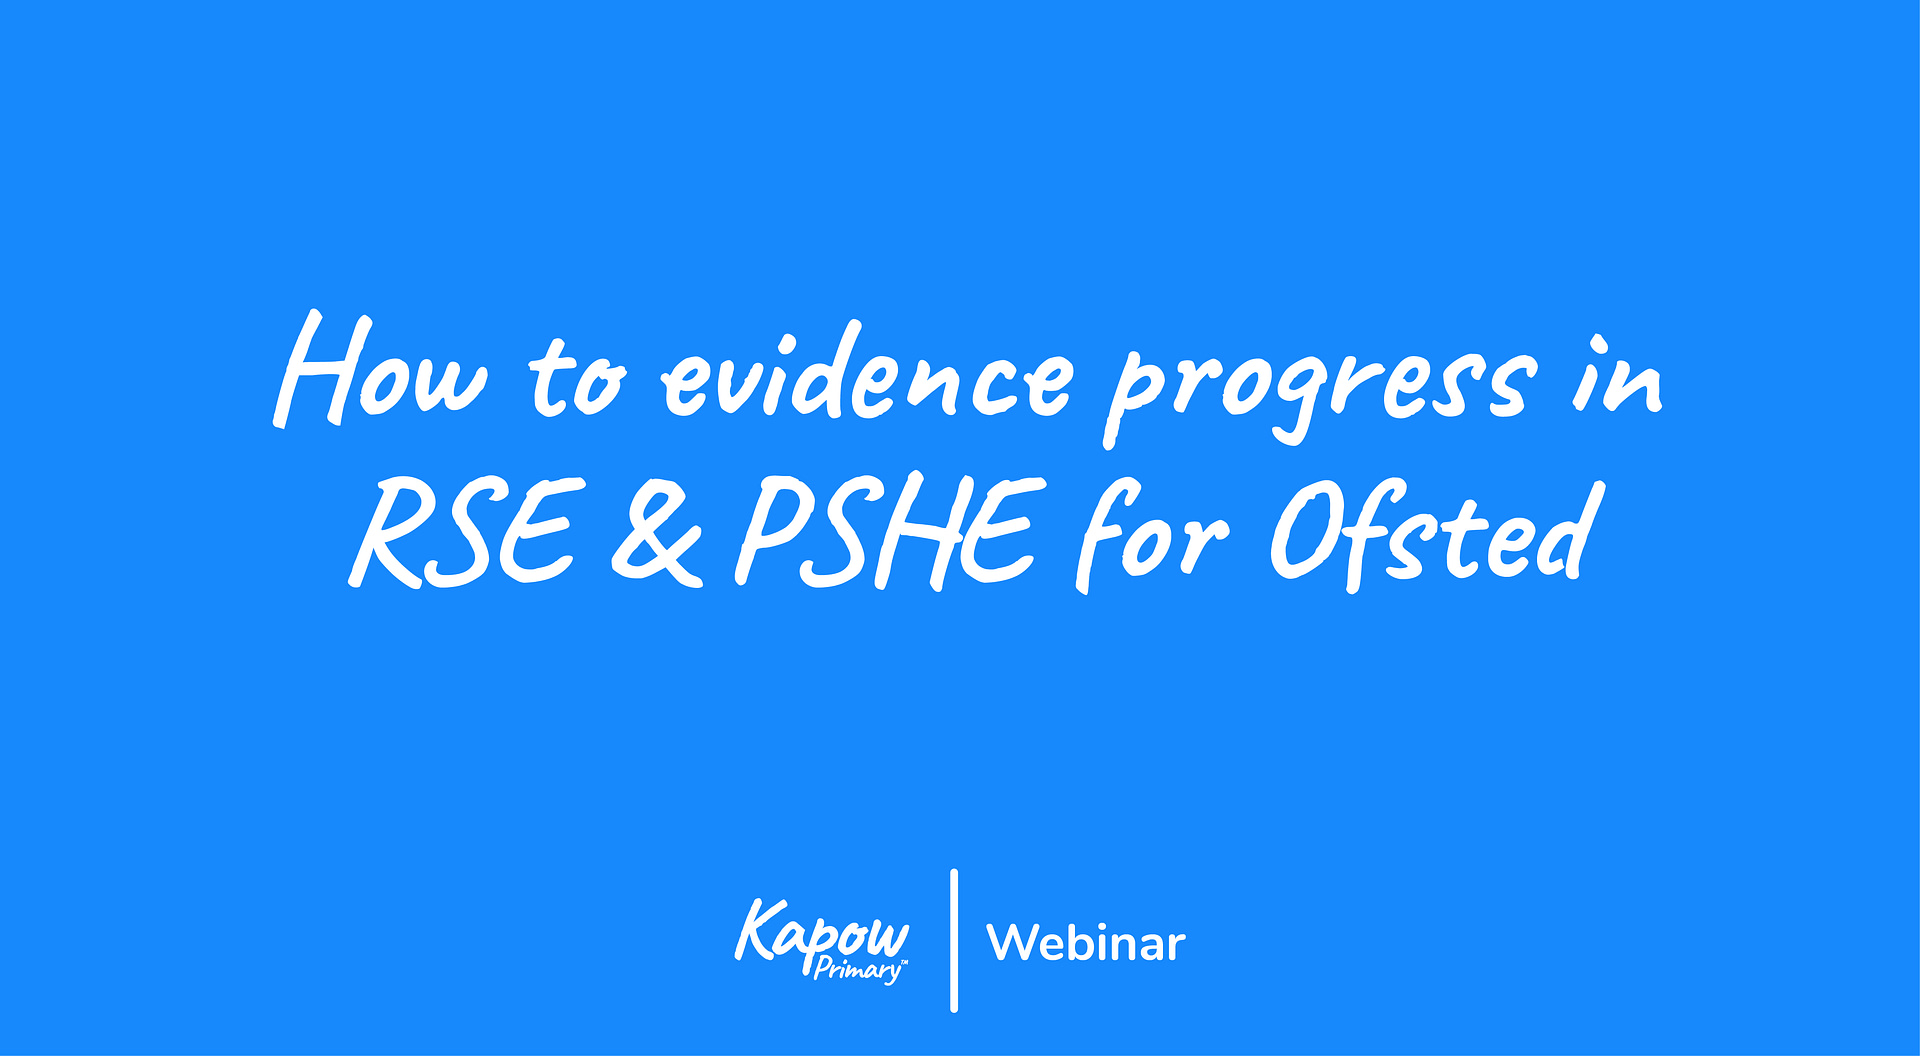 Webinar: How to evidence progress in RSE & PSHE for Ofsted with Sarah Huggins